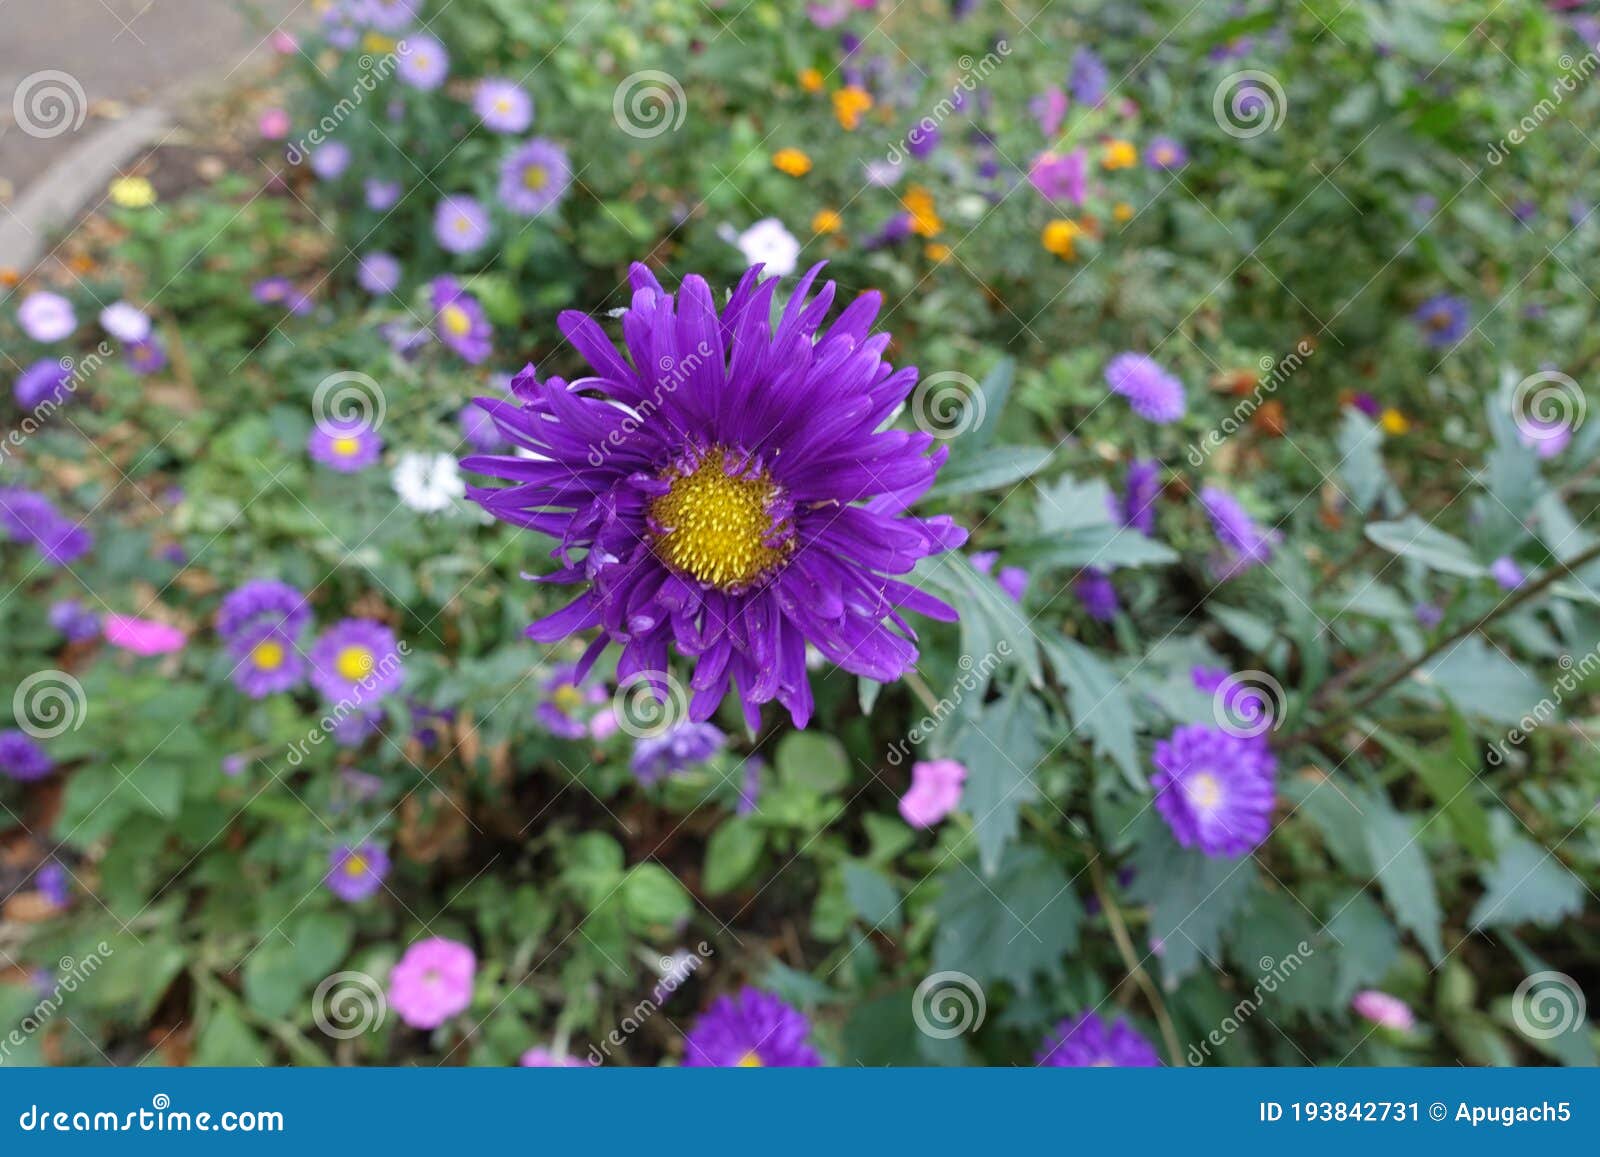 florescence of purple china asters in september